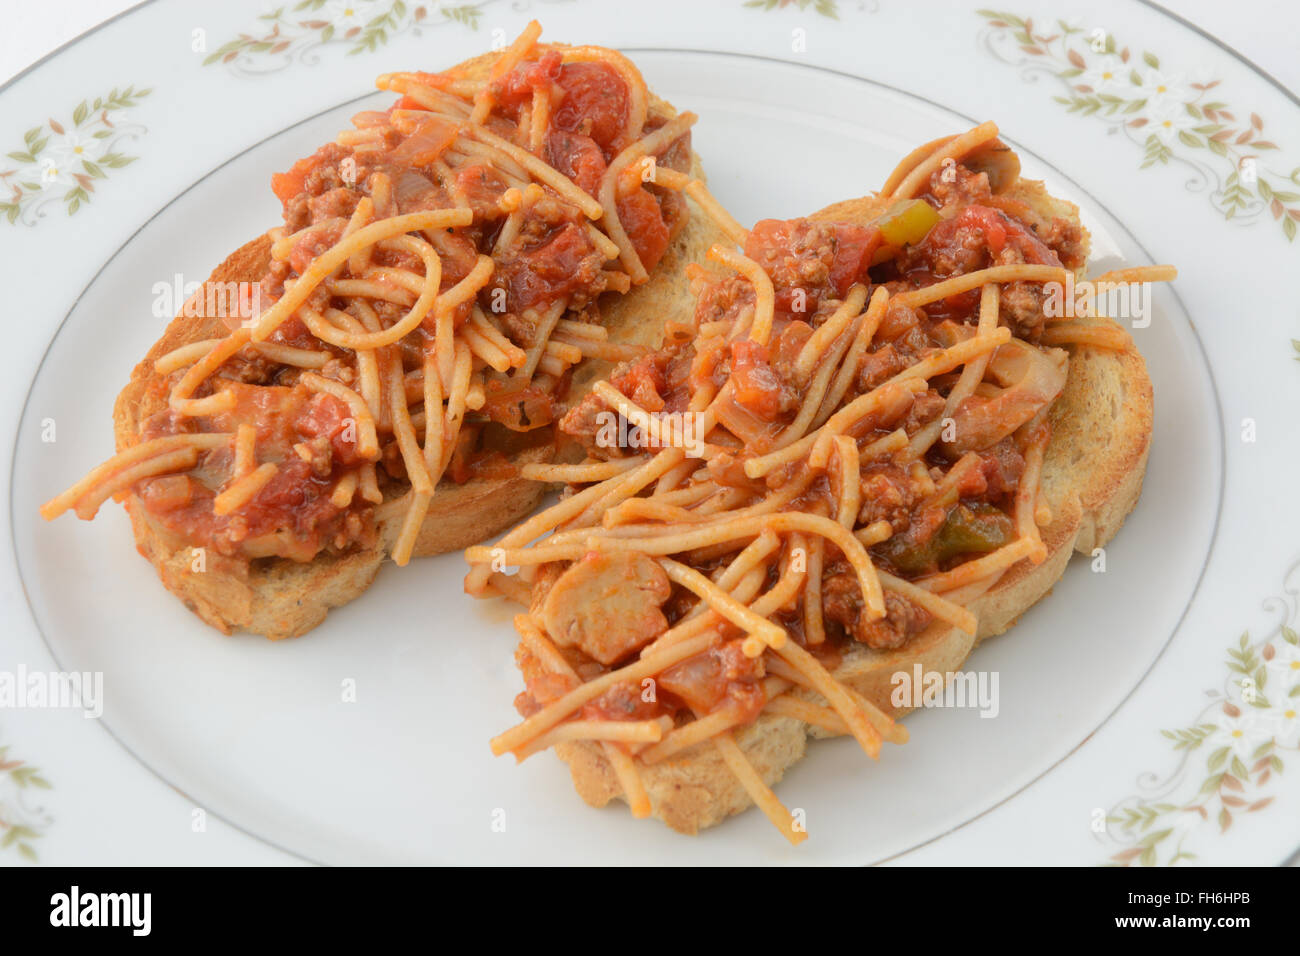 Open faced spaghetti sandwich with whole whet pasta and whole wheat bread Stock Photo